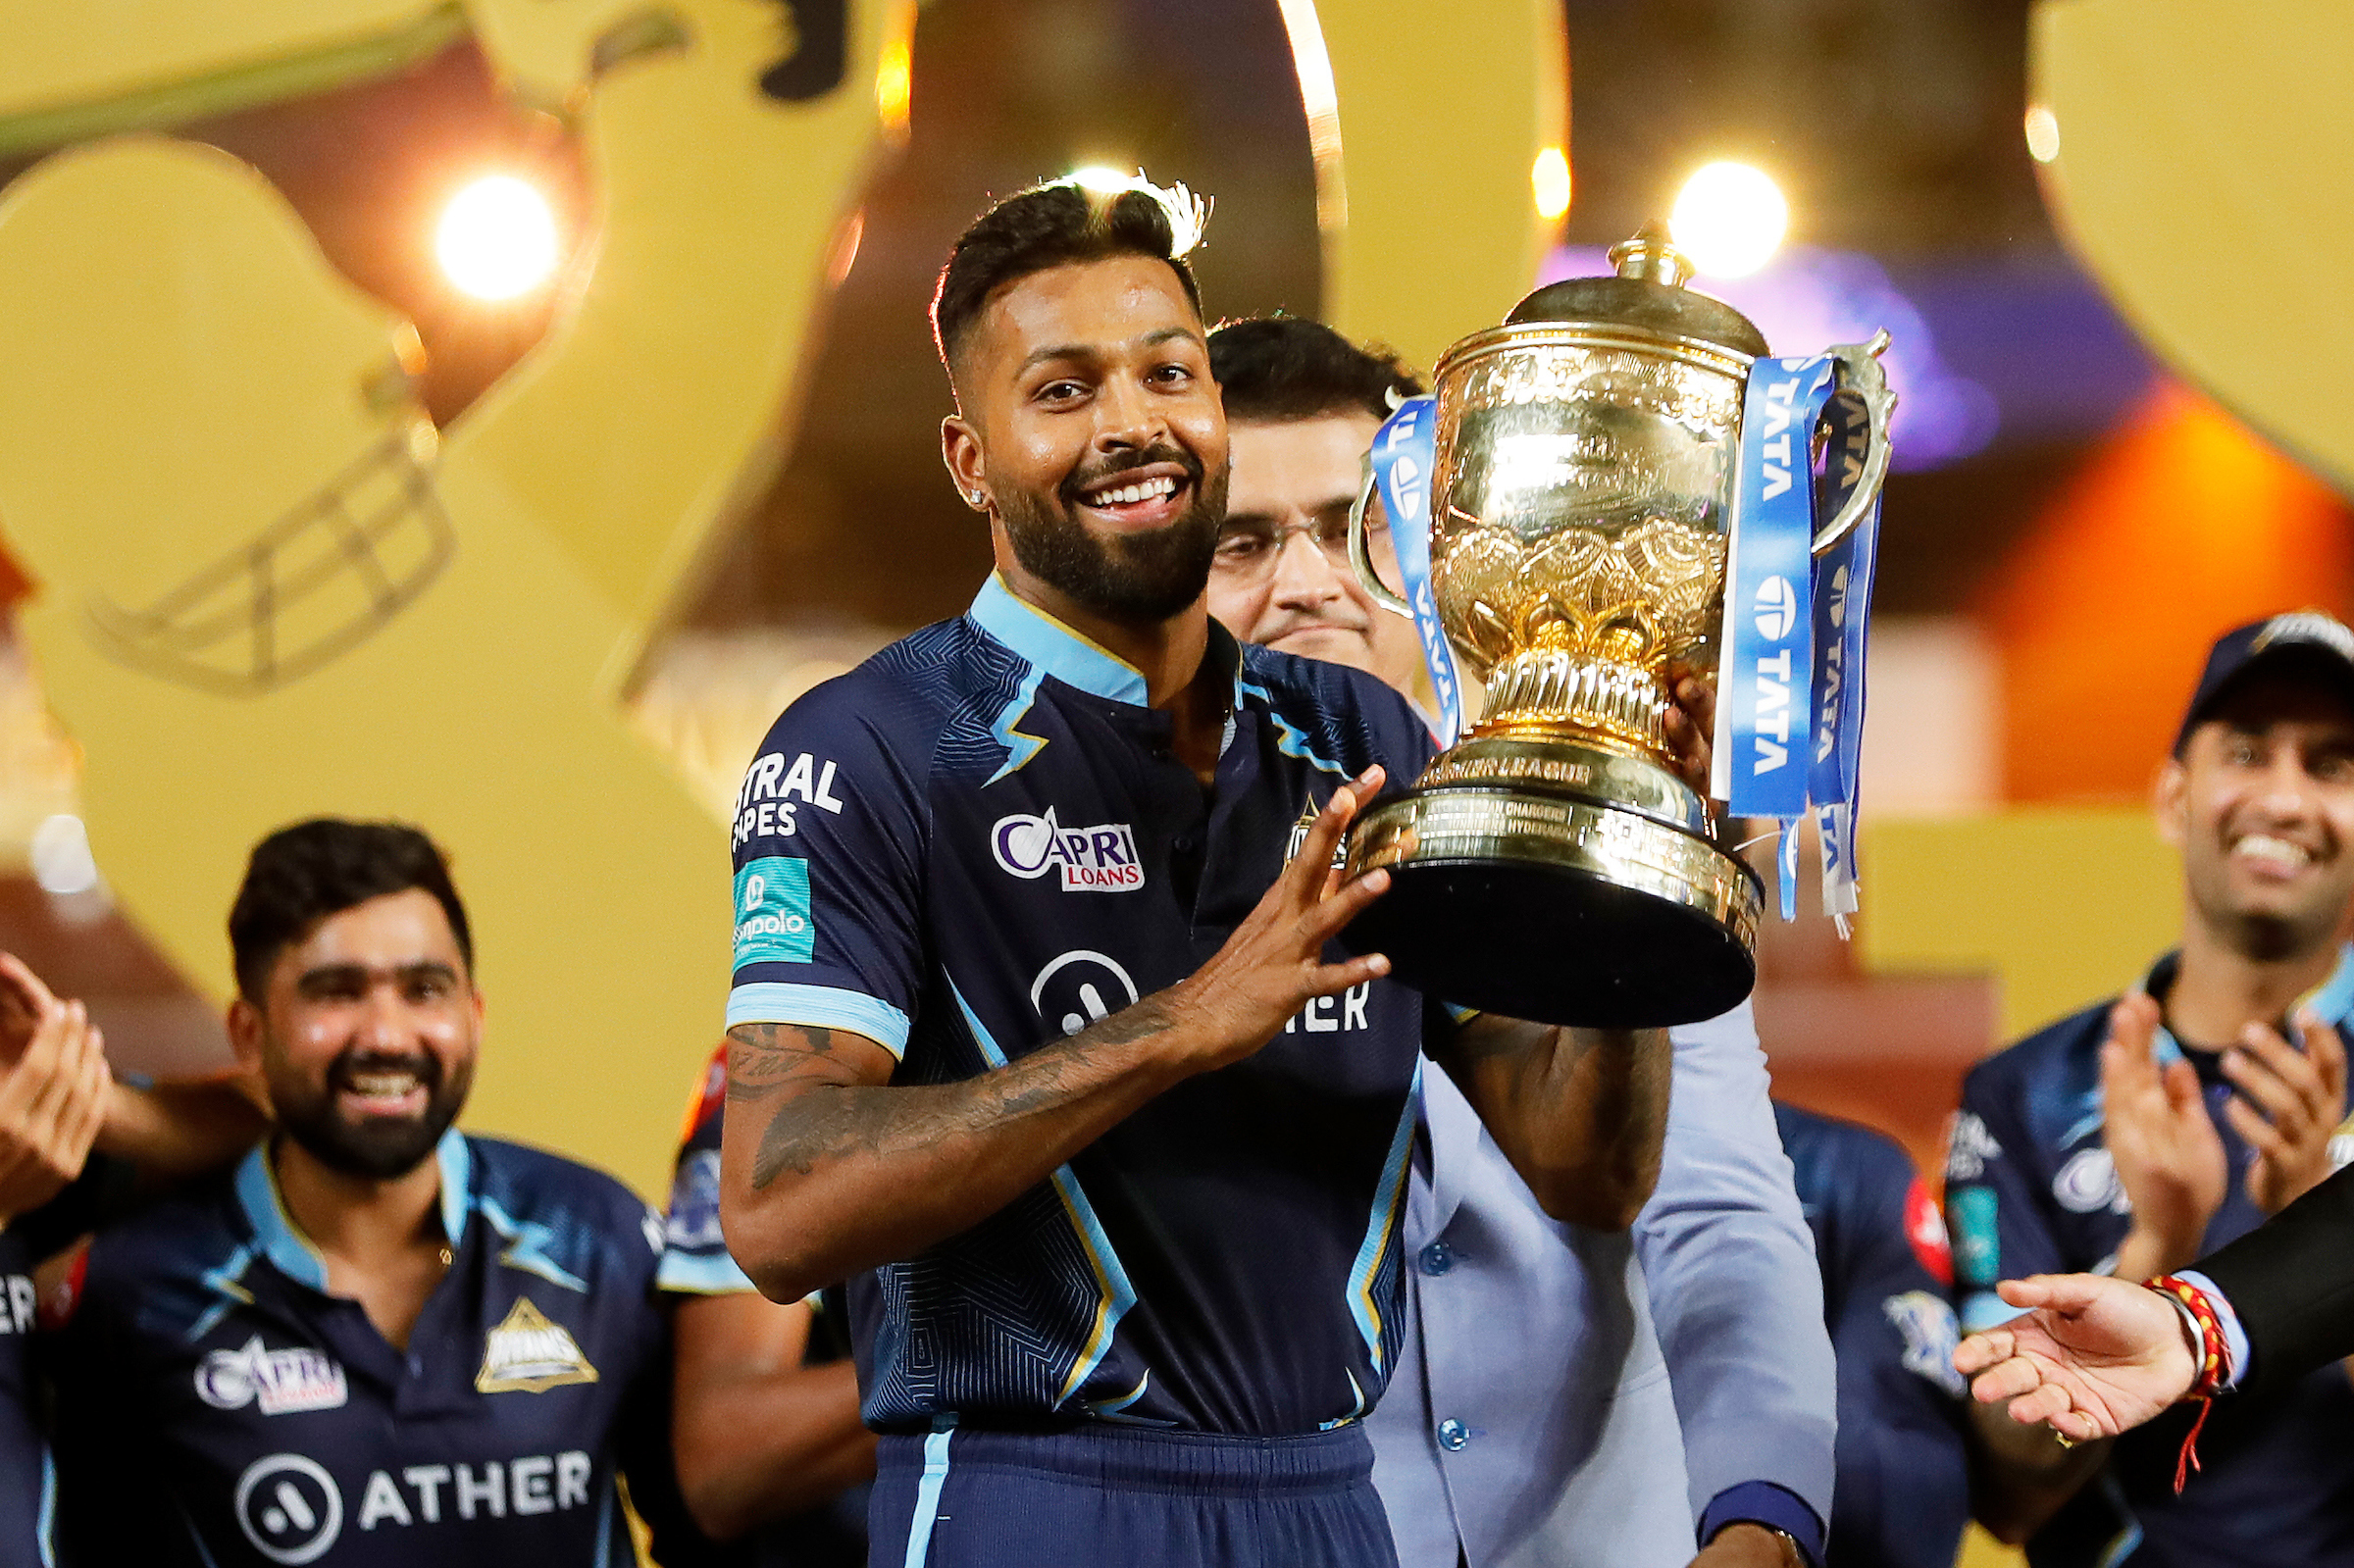 IPL 2023 New Schedule: ICC allows longer window, IPL 2023 to start MID-MARCH and will end in 1st week of June 2023: Follow IPL 2023 Live Updates